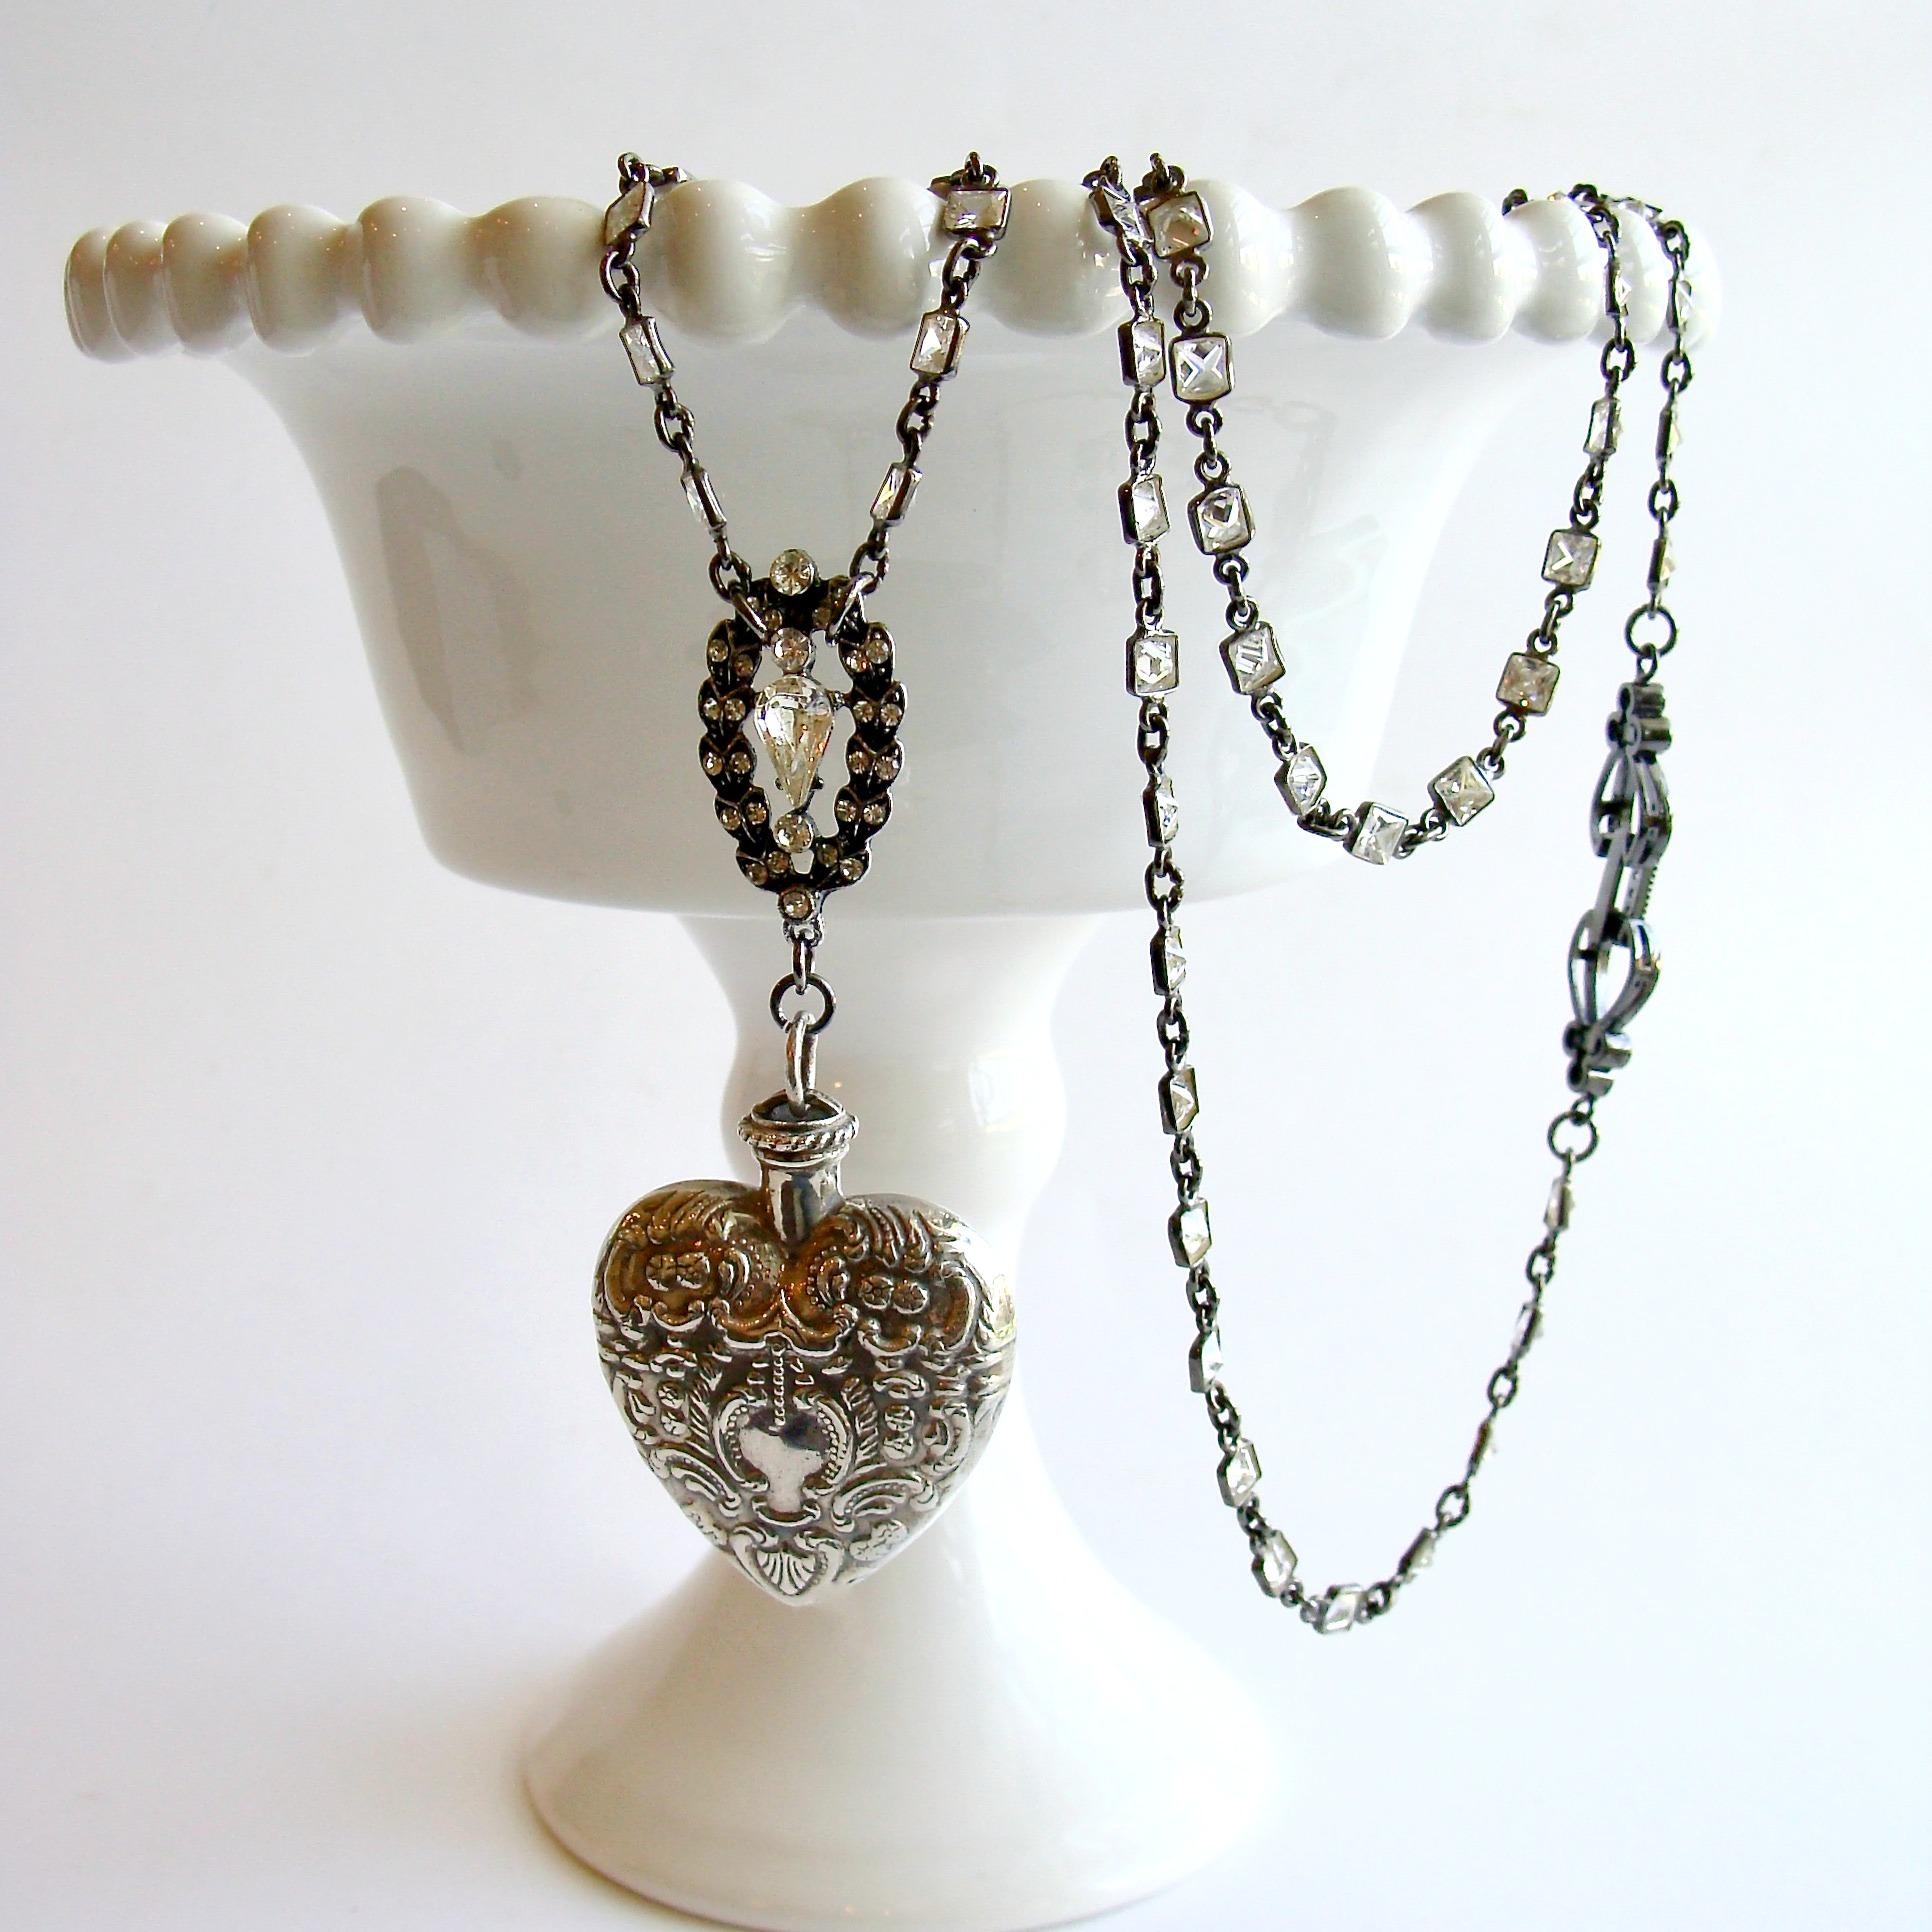 A lovely antique sterling silver repousse chatelaine heart scent bottle is the focal point of this beautiful layering necklace.  A charming rhodium silver paste cartouche presides over the top of this feminine heart shaped bottle, while a sparkling